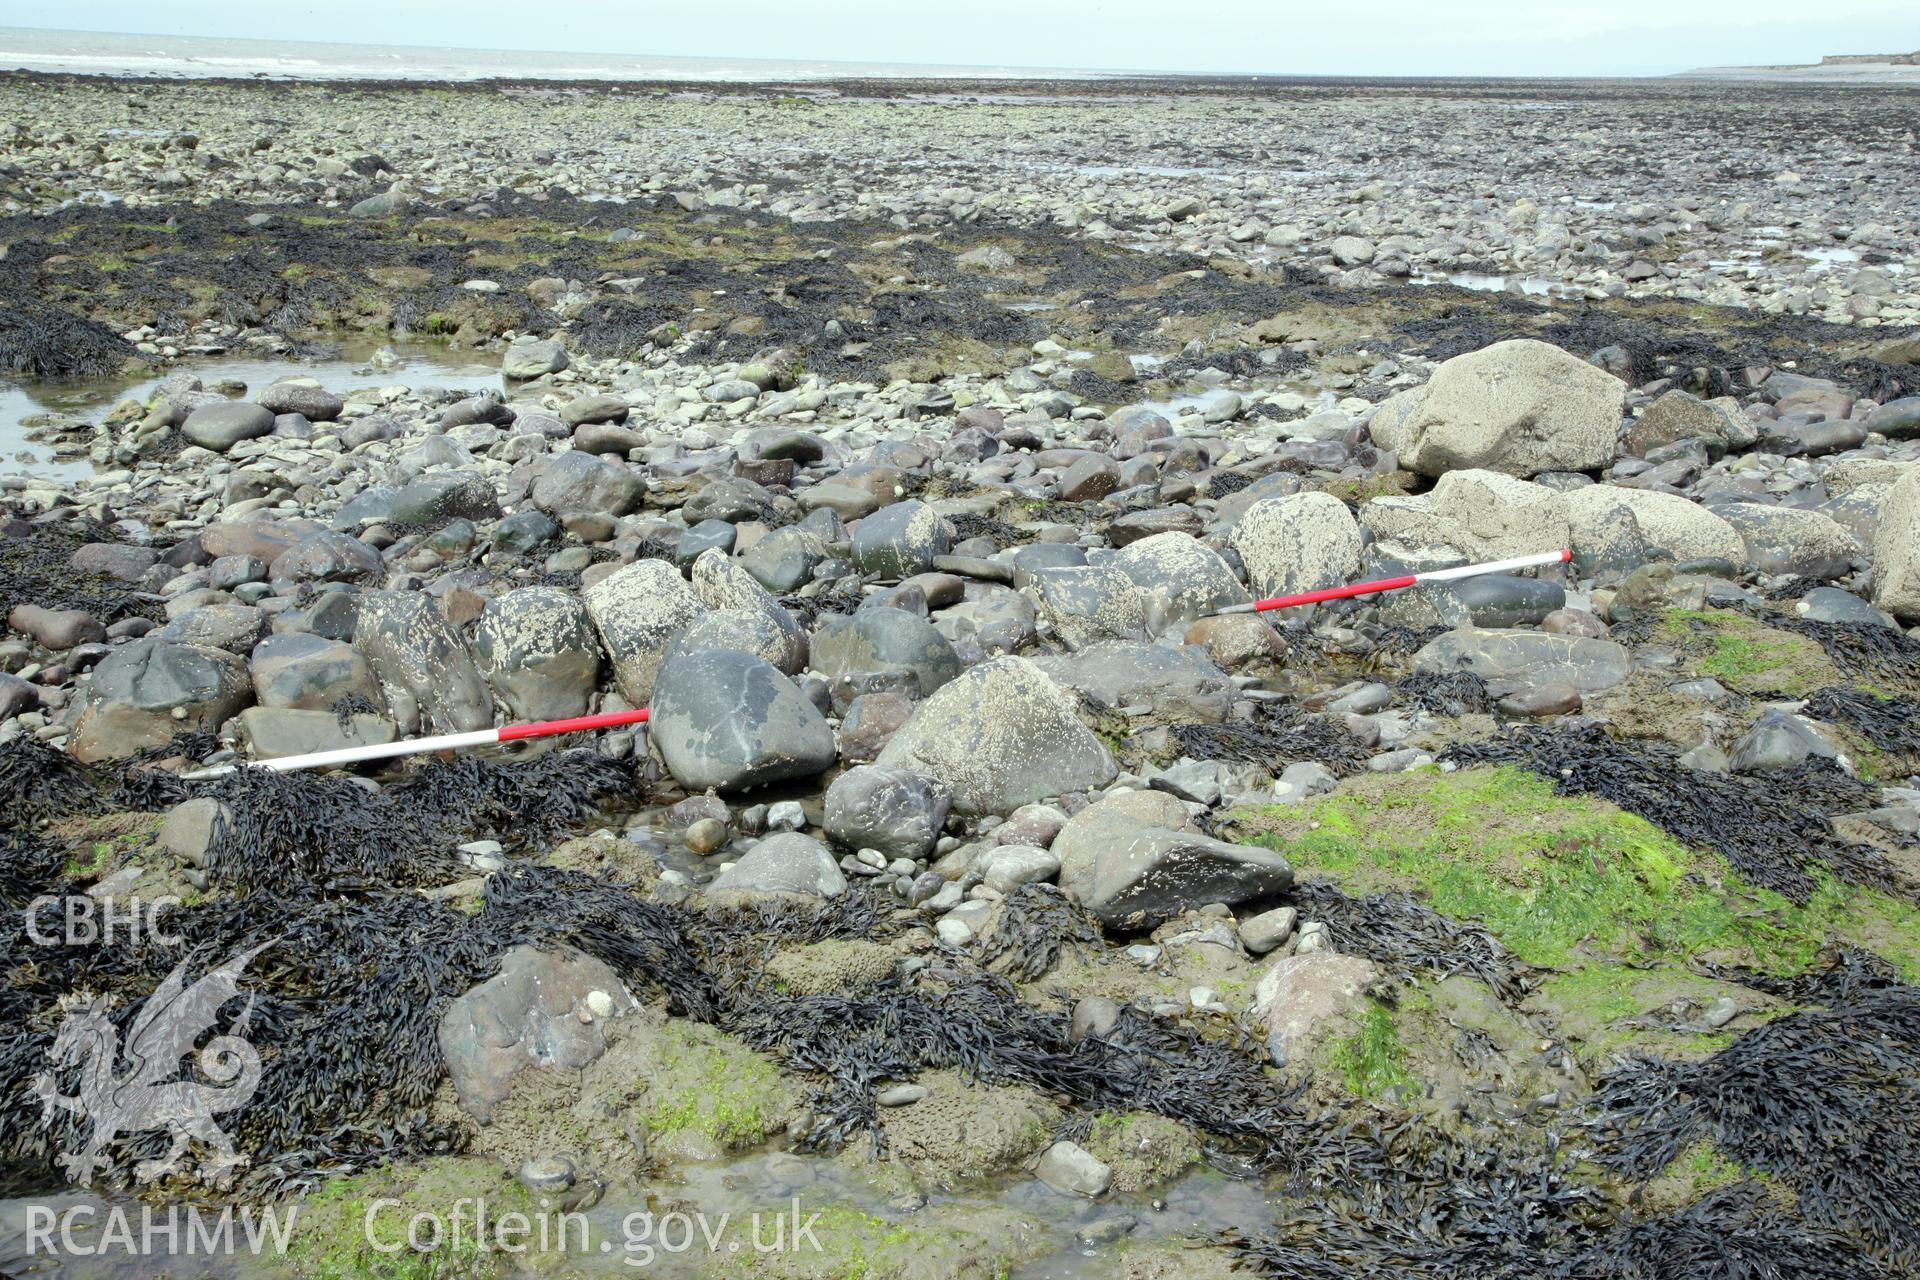 Northern section of fish trap arm, looking west. Shows alignment of boulders composing stone wall, with two 2m ranging poles showing scale and orientation.